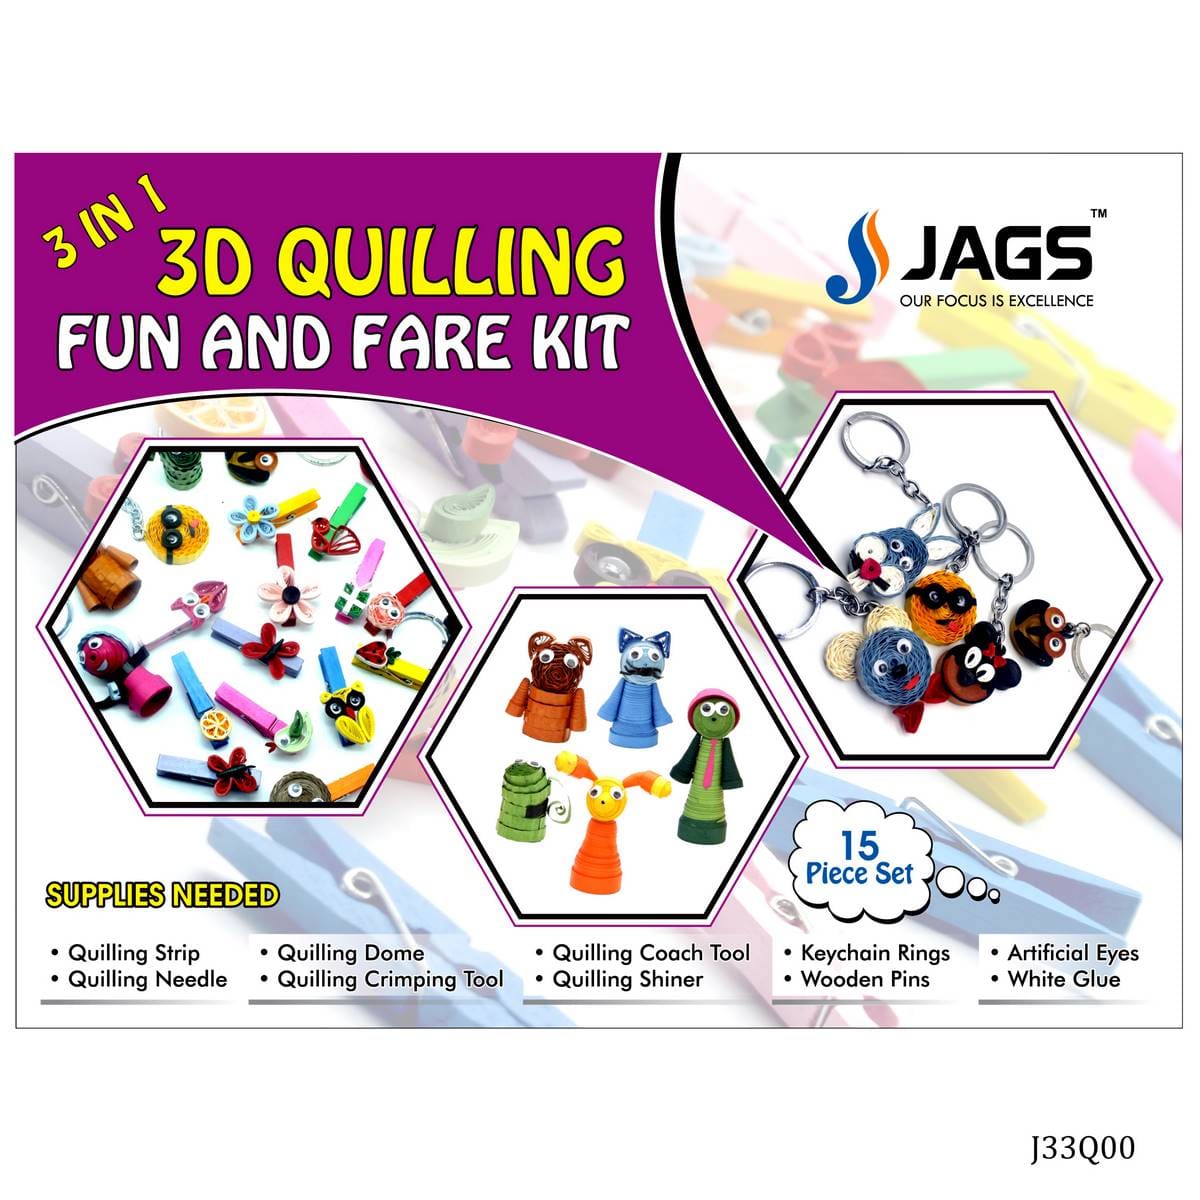 jags-mumbai Tools Jags 3in1 3D Quilling Fun and Fare Kit – Create Unique Crafts with Easy-to-Use Tools